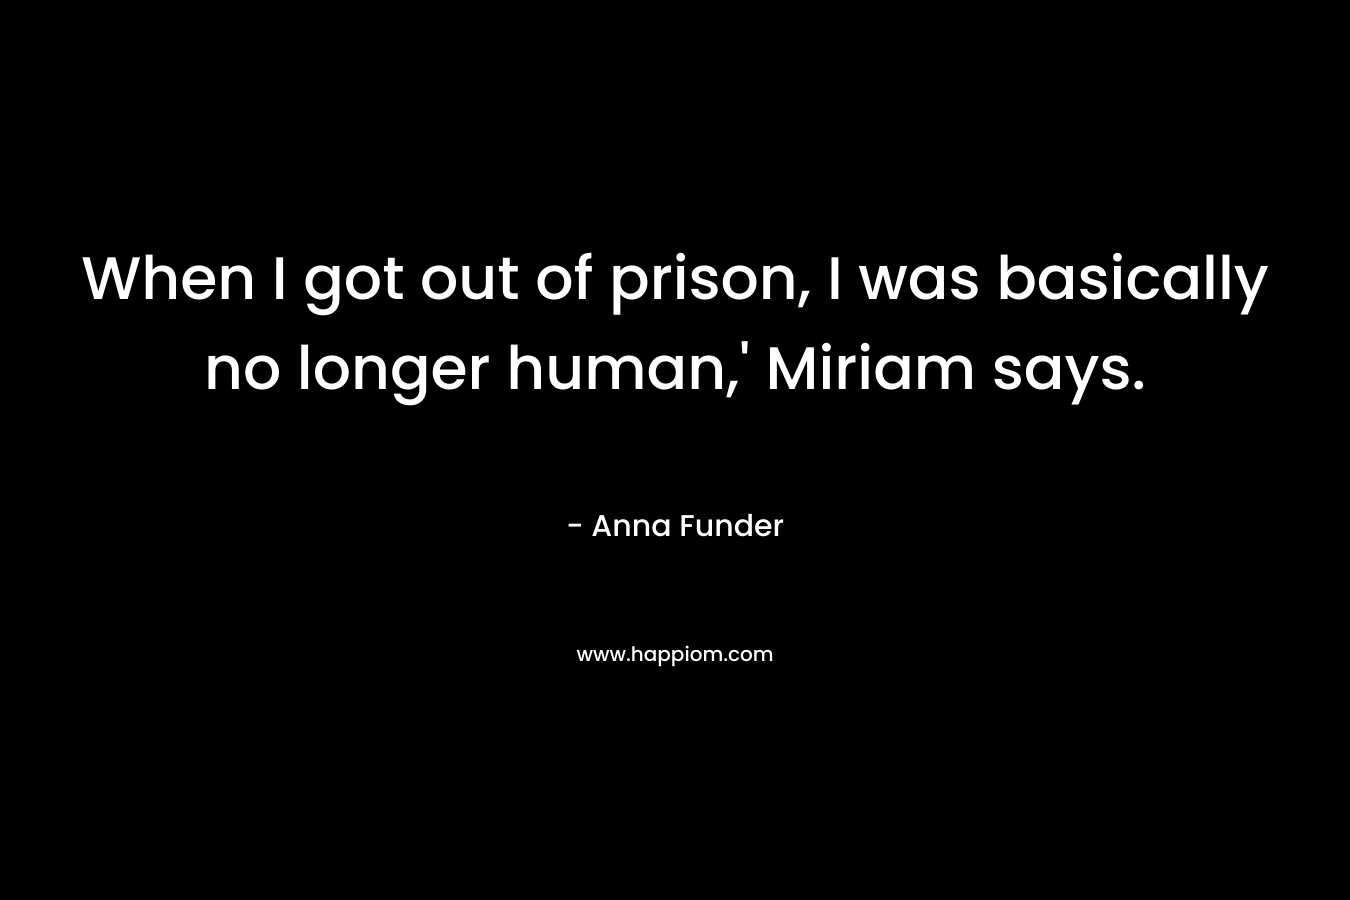 When I got out of prison, I was basically no longer human,’ Miriam says. – Anna Funder